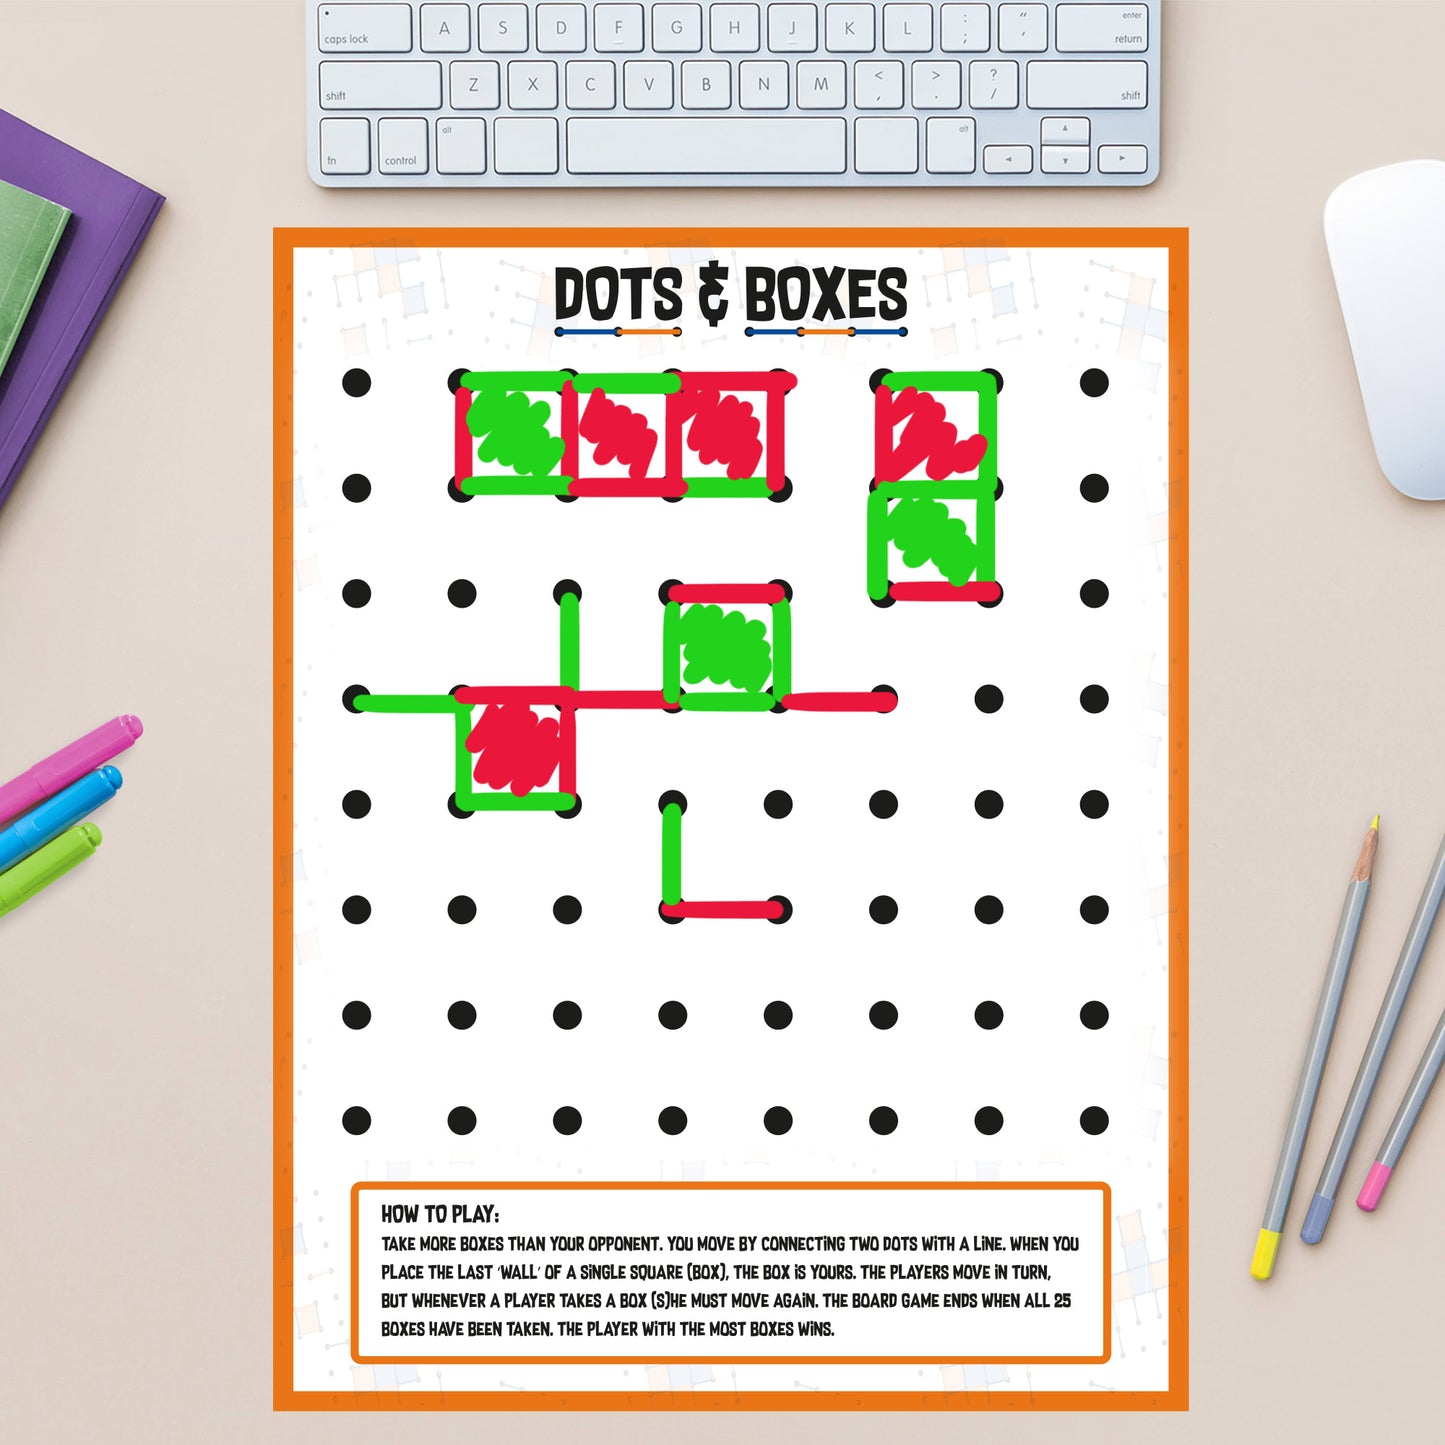 Dots & Boxes - Removable Dry Erase Vinyl Decal